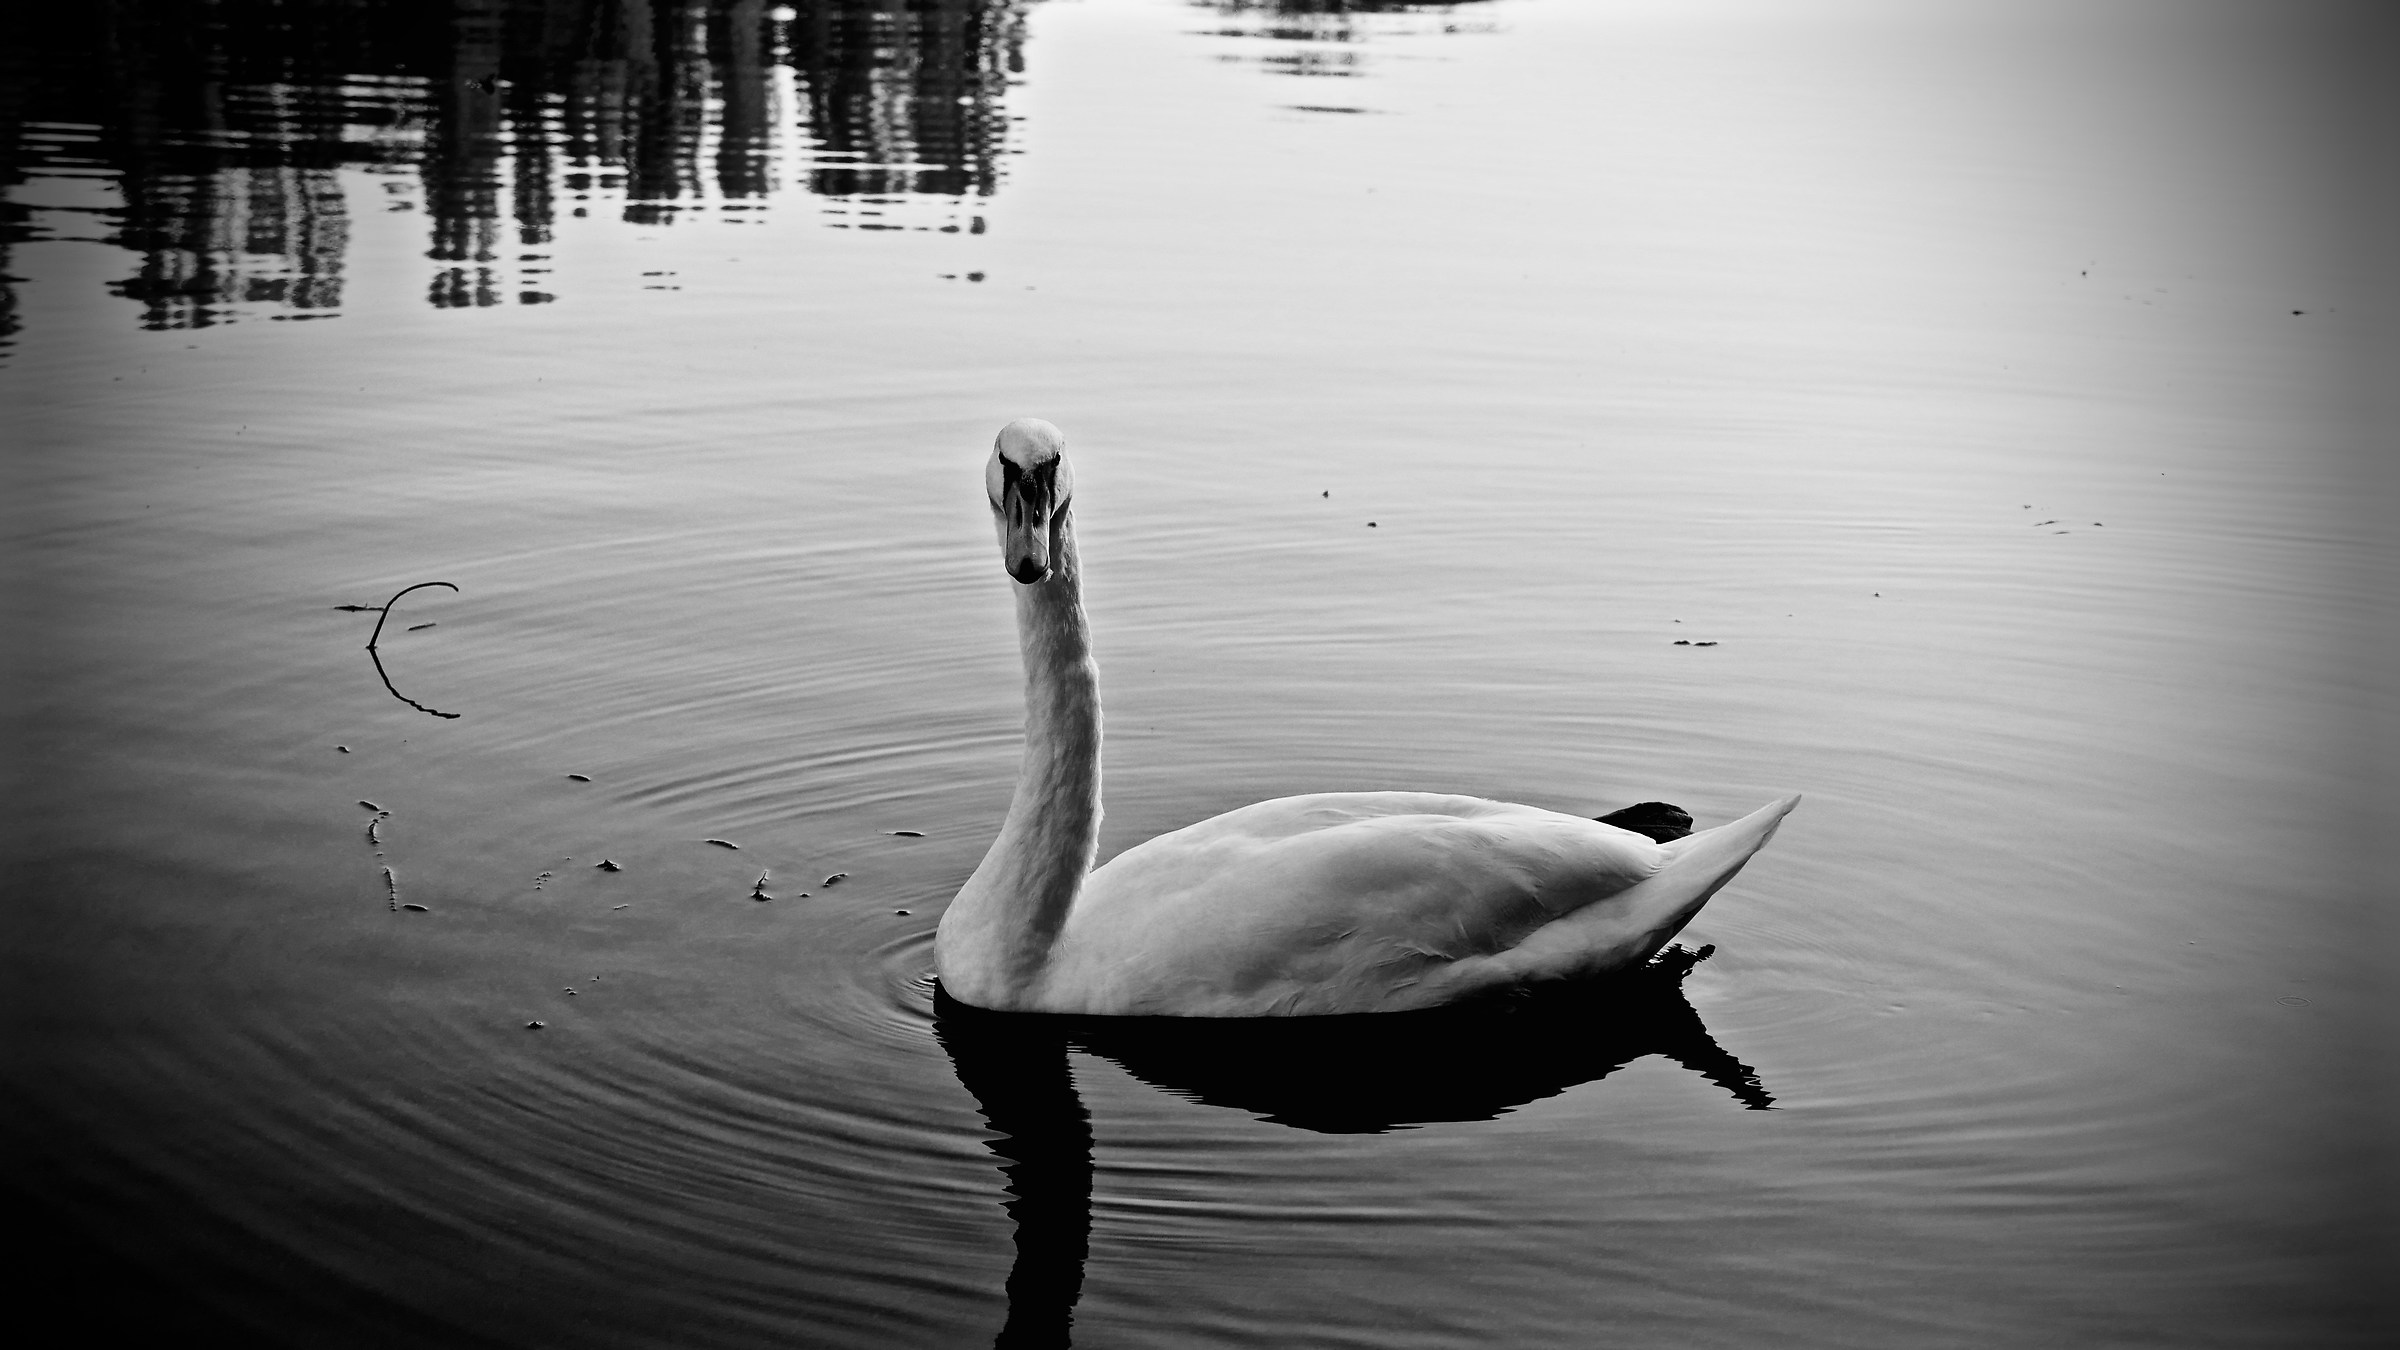 The swan on the little b / n...